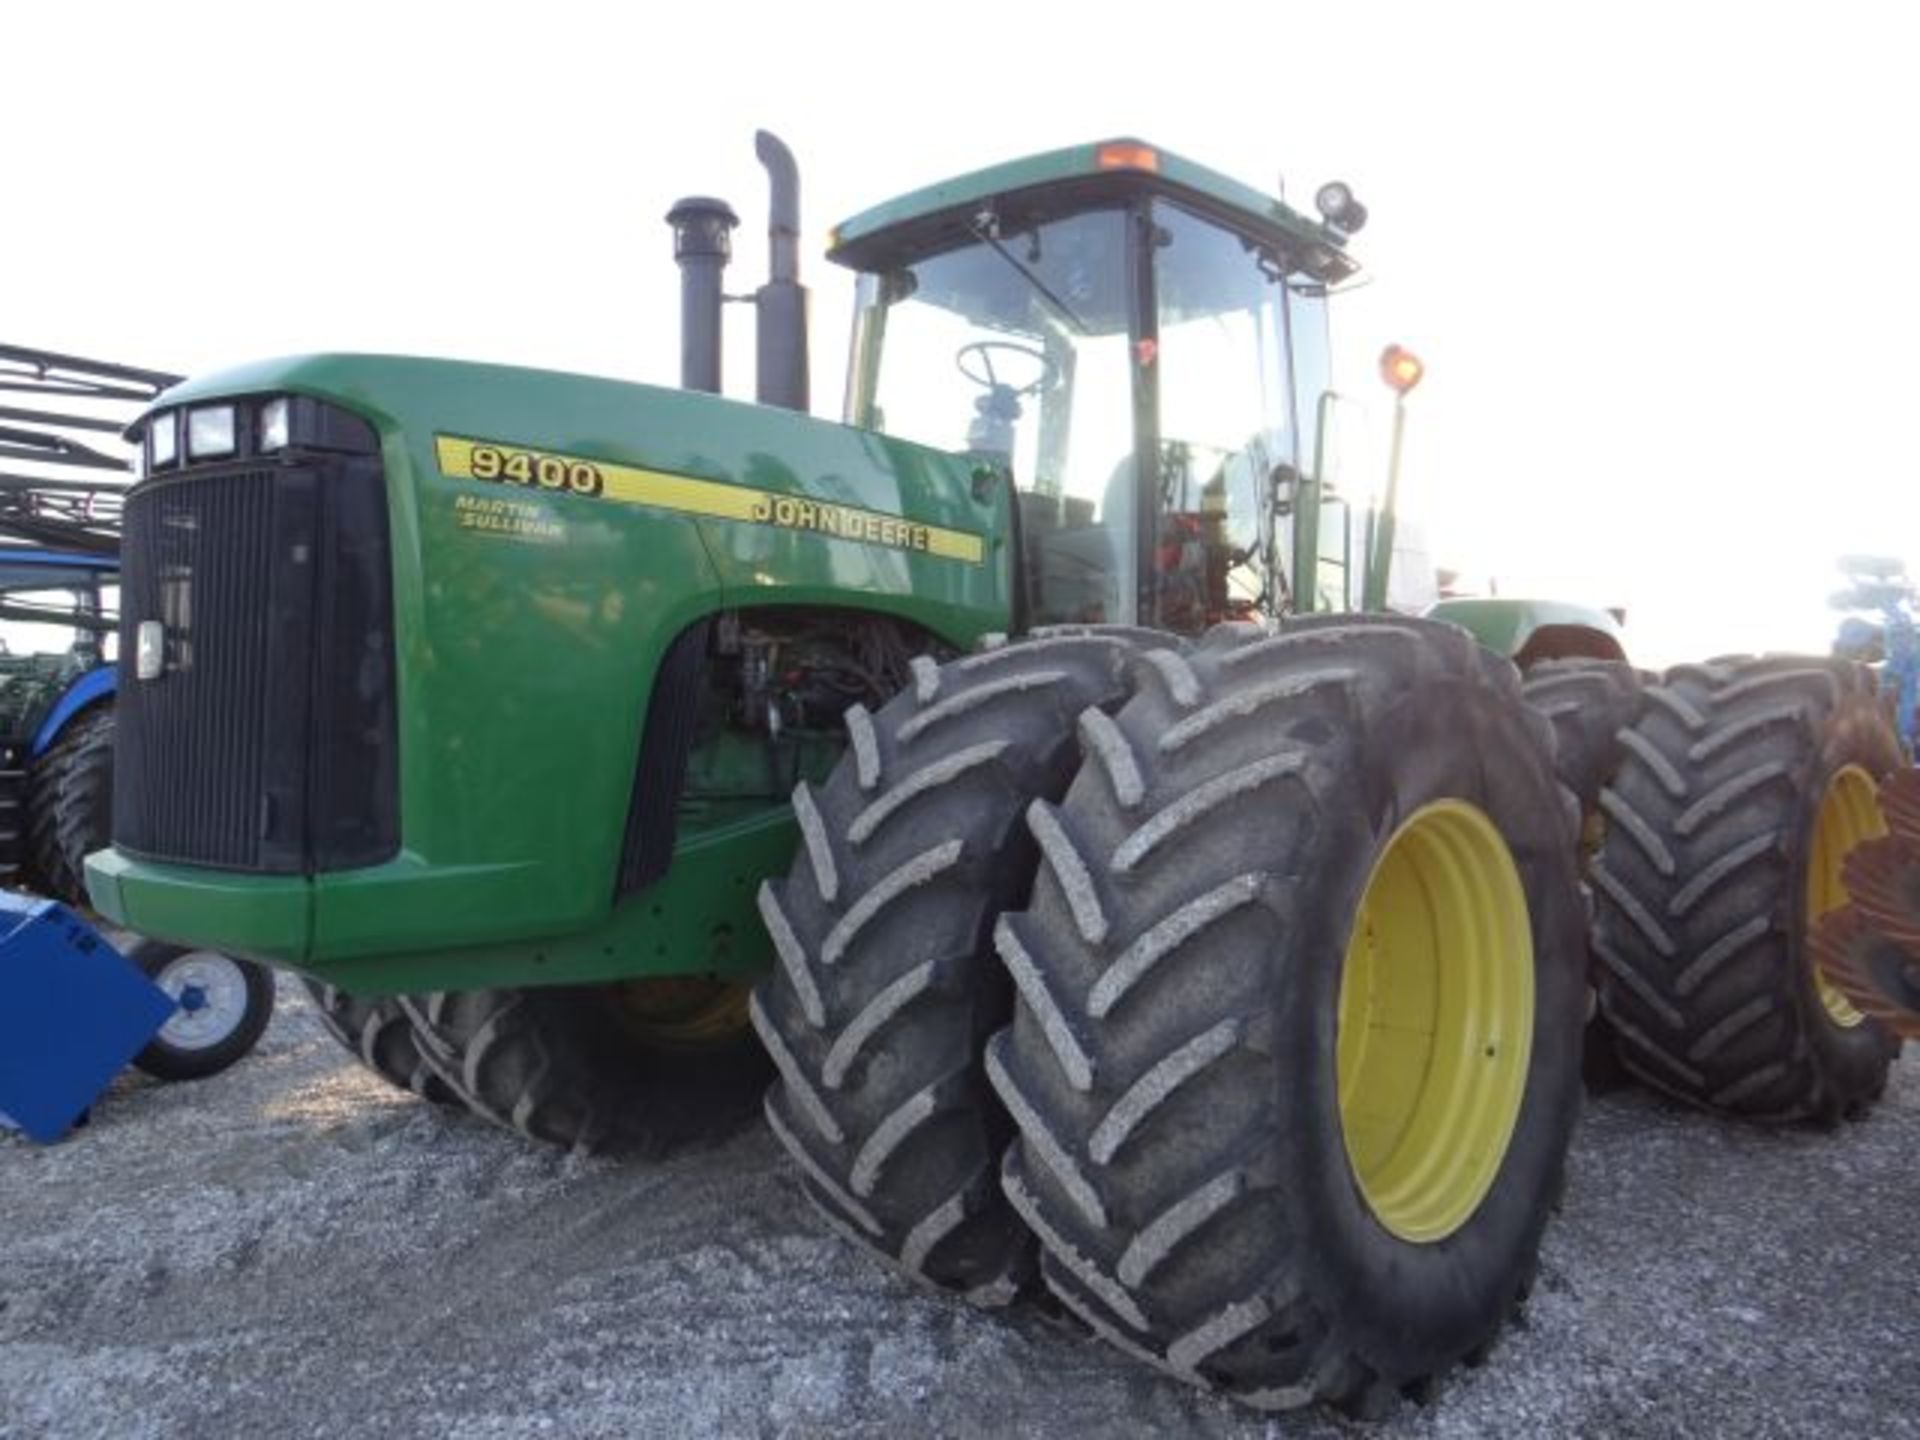 JD 9400 Tractor, 1998 w/ Duals, 6356 hrs, 3 SCV, 3pt Hitch, Powershift Trans, Differential Lock